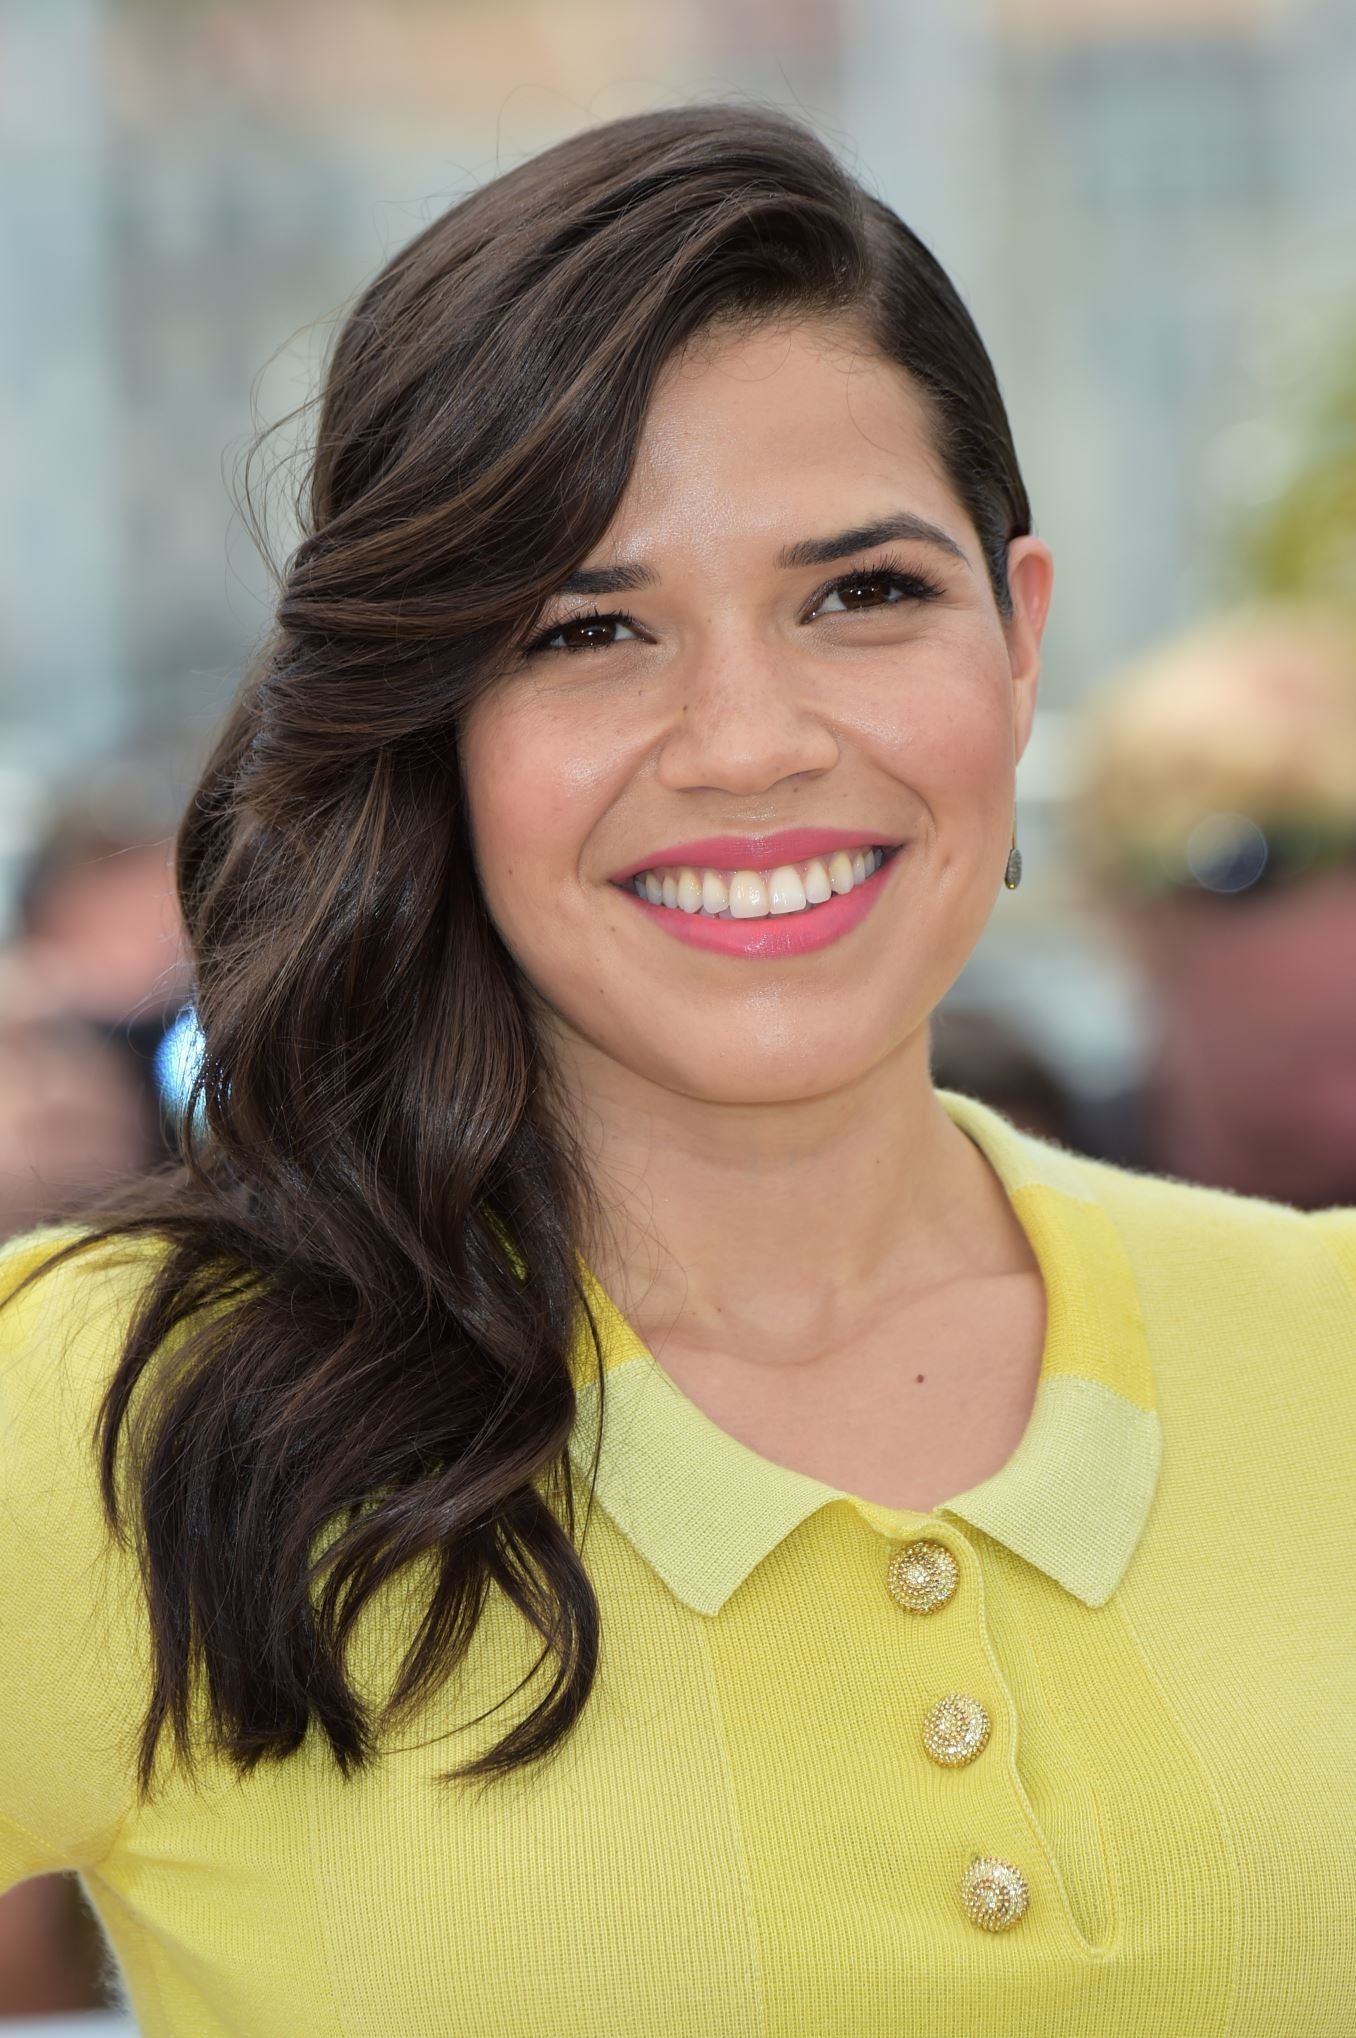 Lloyd's of London reported that "Ugly Betty" star America Ferrera insured her smile for a cool $10 million. This policy was bought due to her work with Aquafresh White Trays for the charity Smiles for Success.